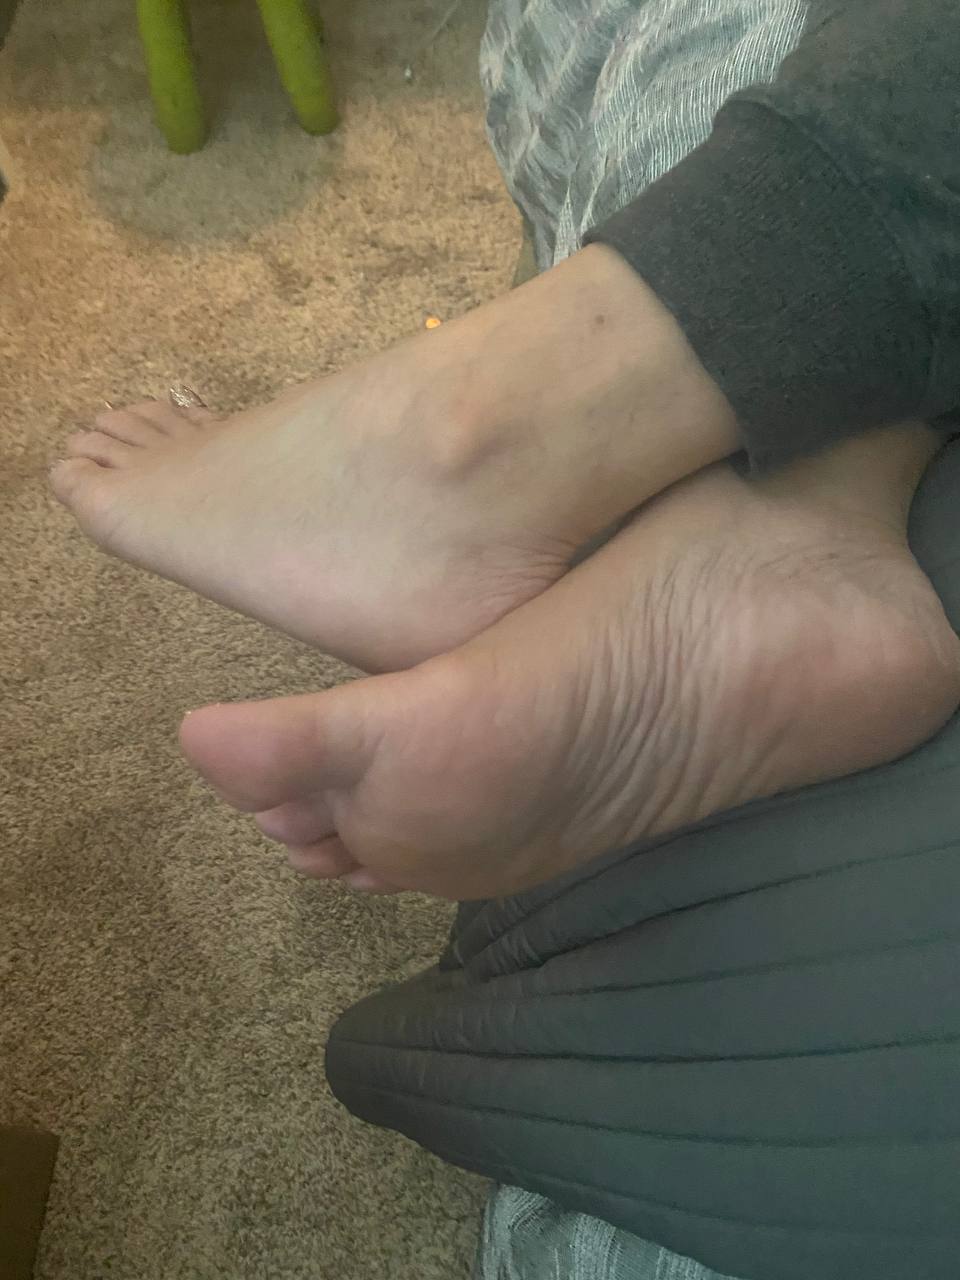 Jerking and rubbing on napping moms feet